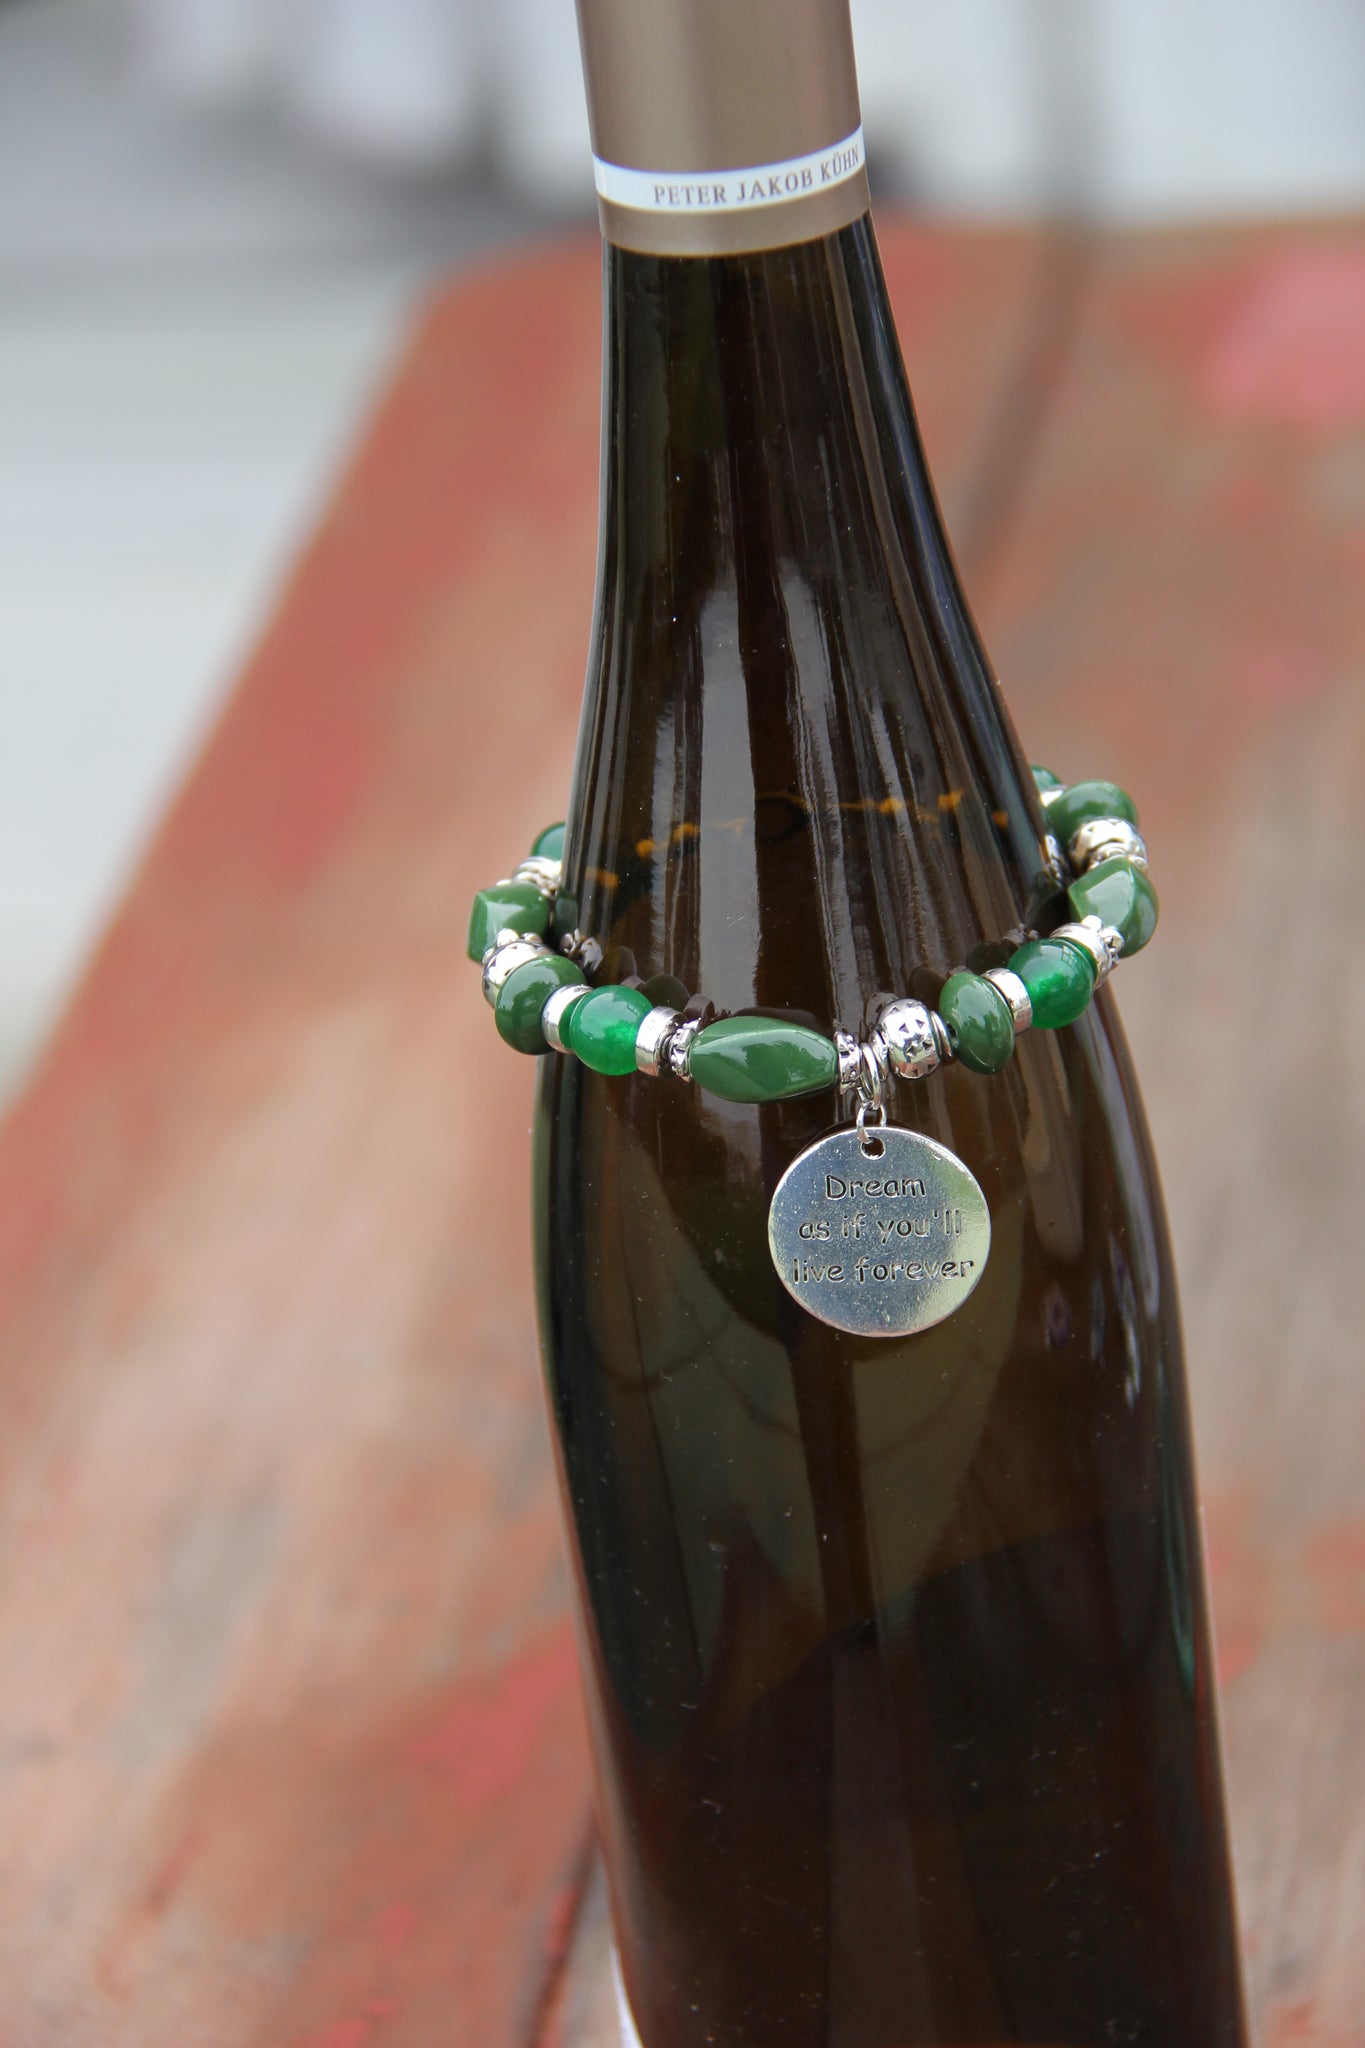 Green beads bottle bracelet with "Dream as if you'll live for ever" charm.